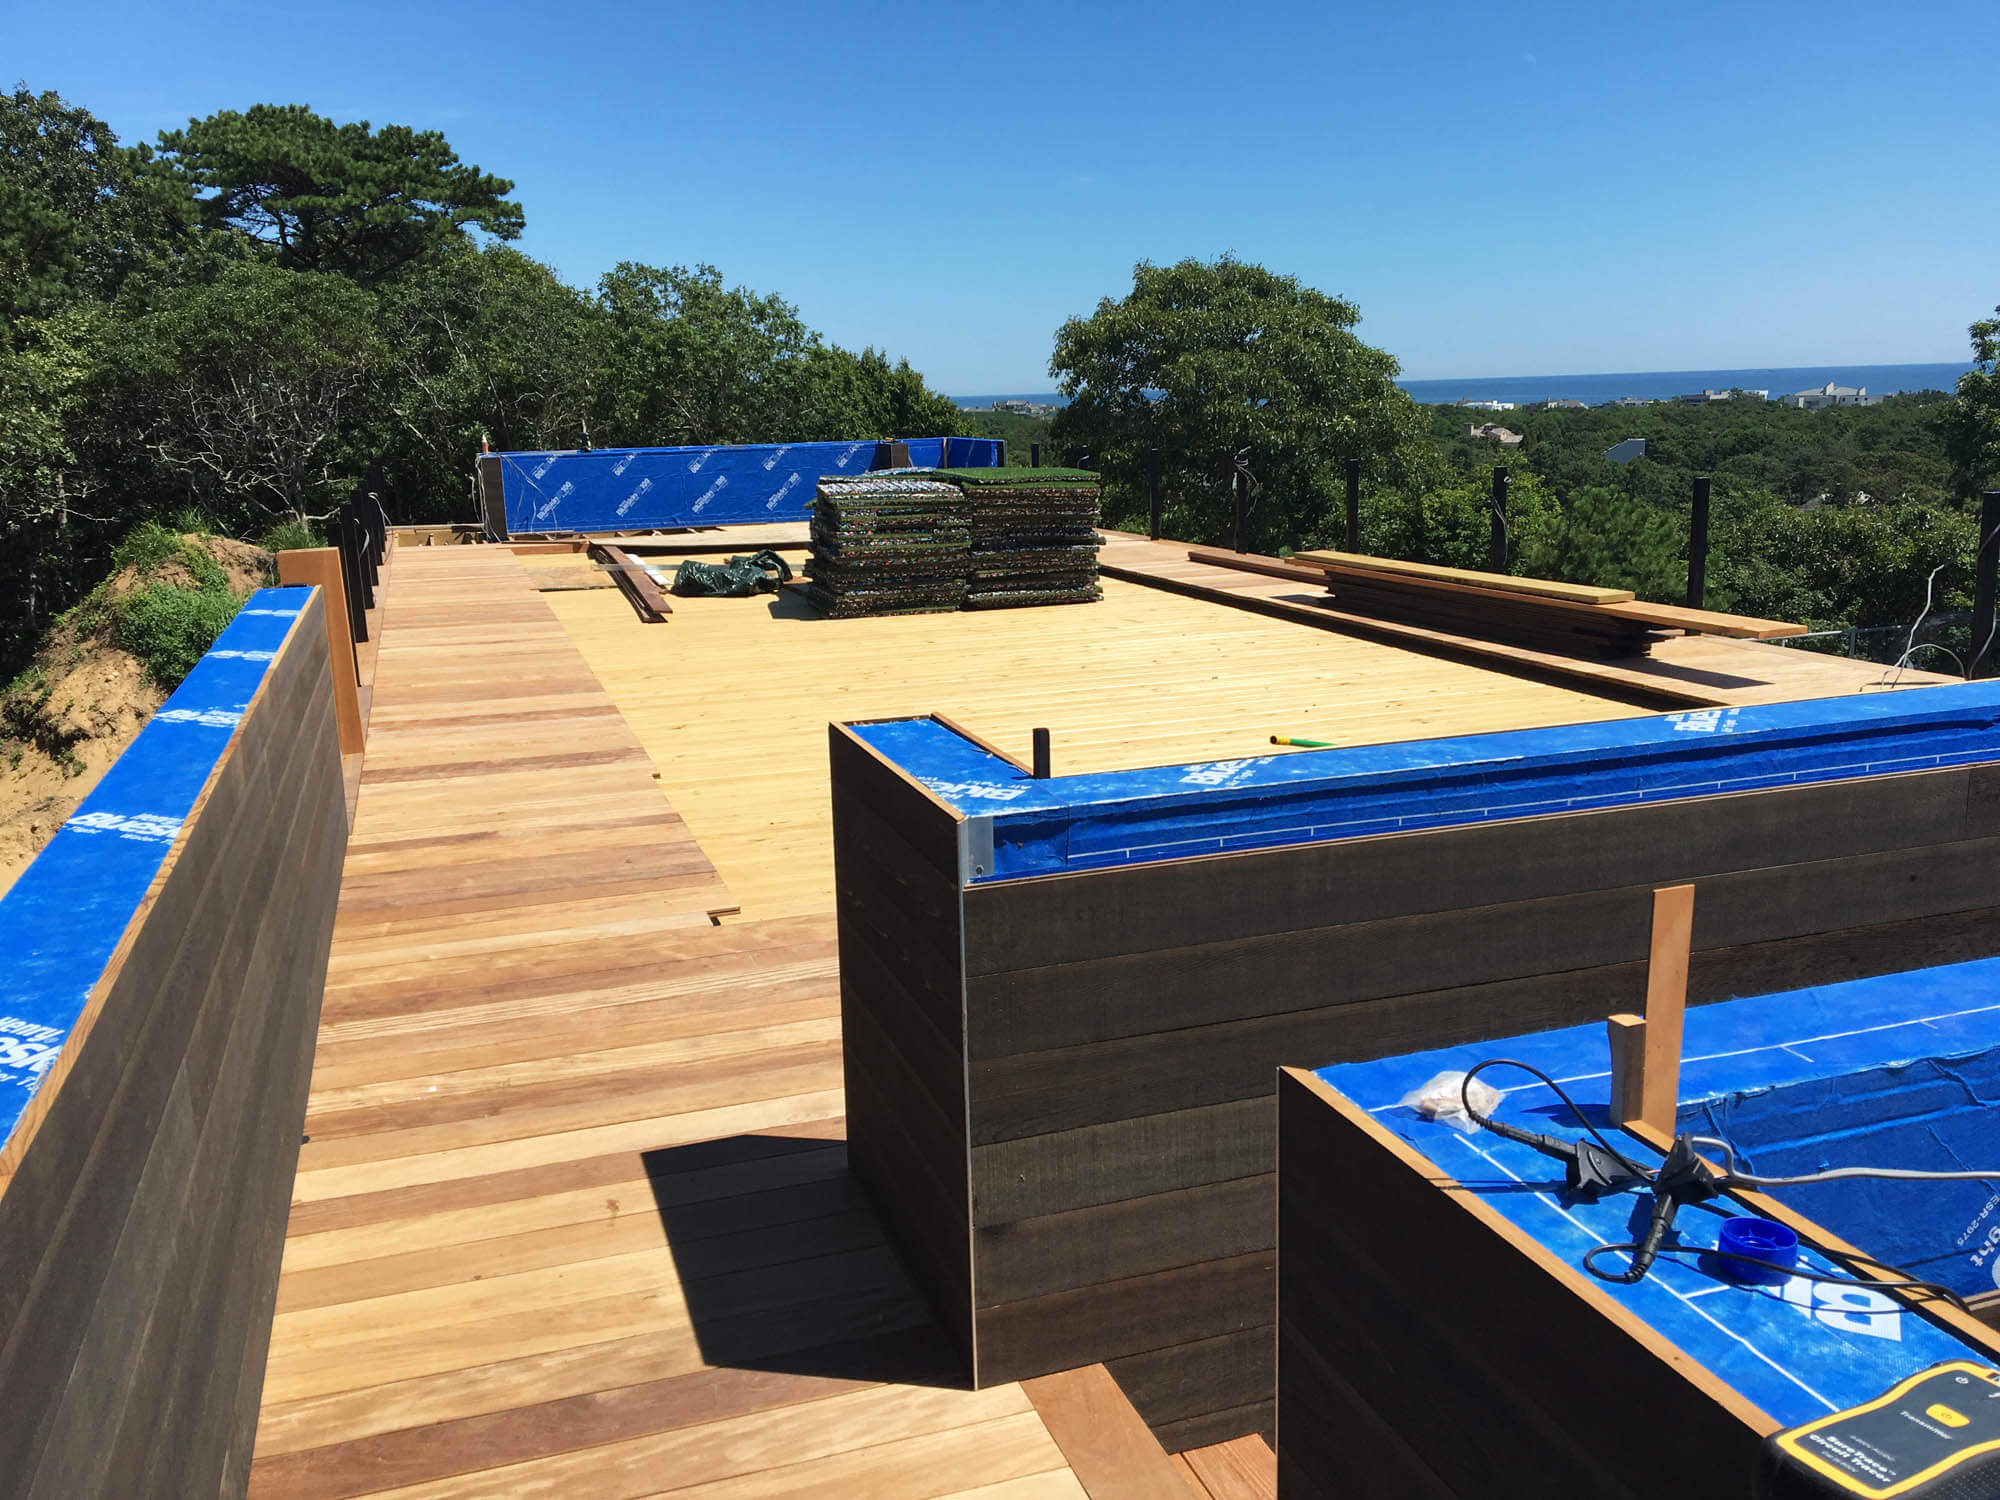   Roof Deck &nbsp;-  Ipe decking and bocce court installation are in construction.  